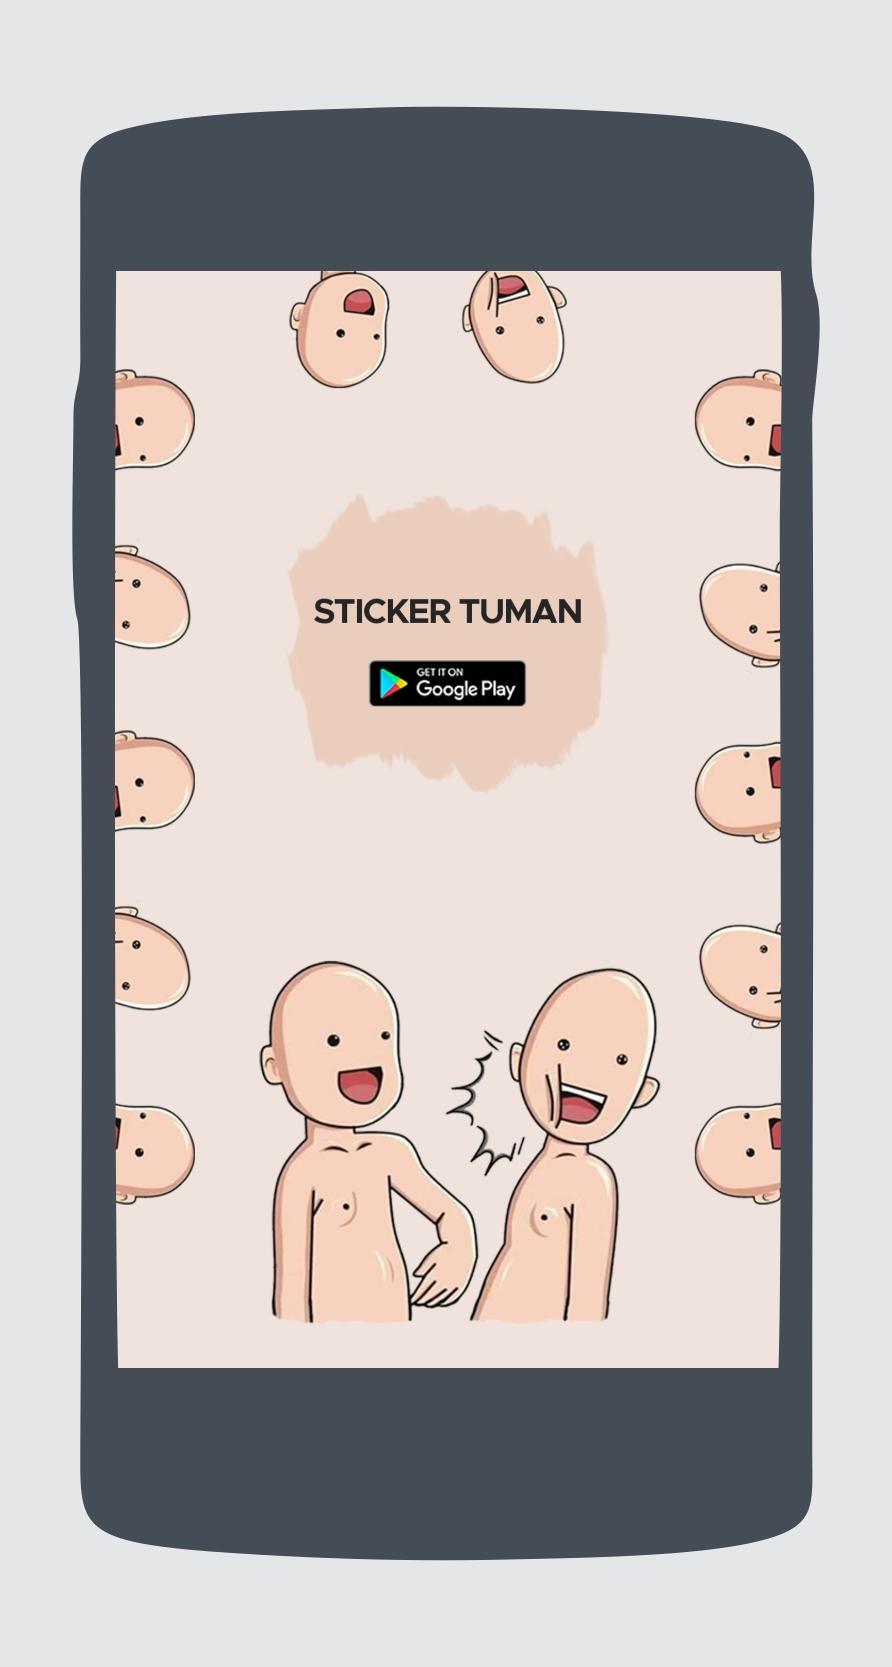 Tuman Sticker Lengkap Lucu Wastickerapps For Android Apk